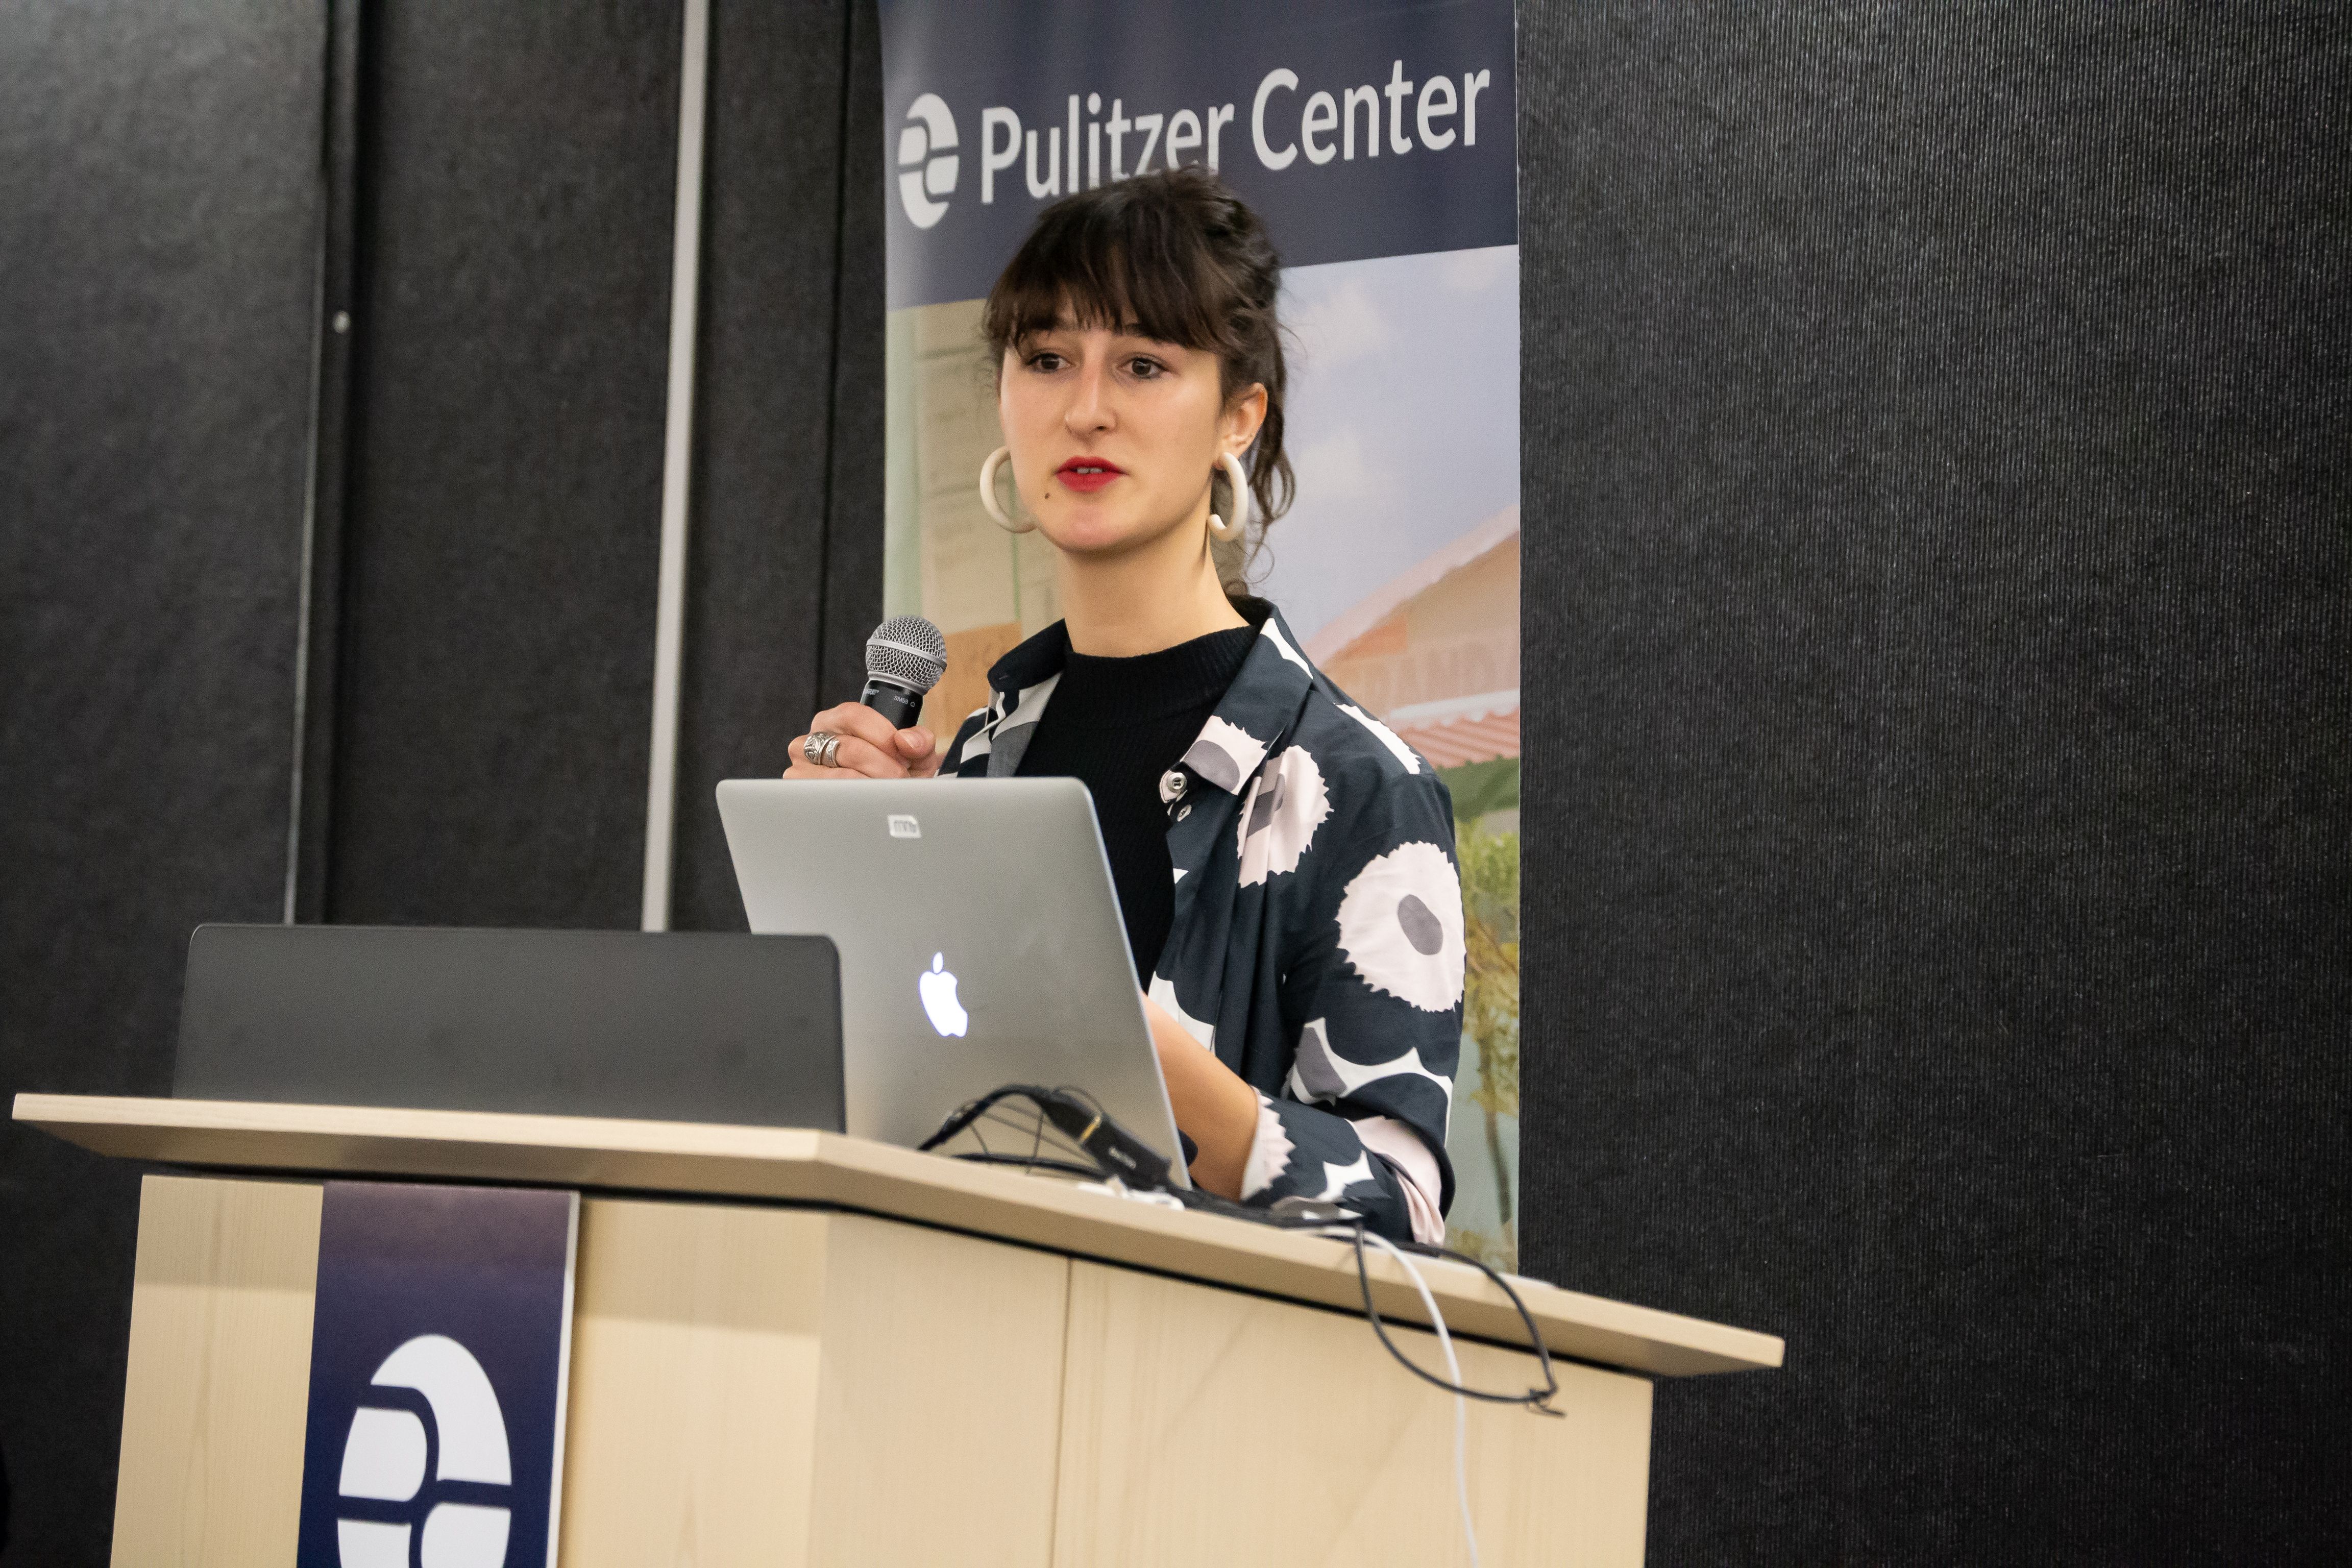 Olivia Norrmén-Smith from McGill University presents her reporting on mental health and remediation in Cambodia. Image by Katie Brown. United States, 2019.